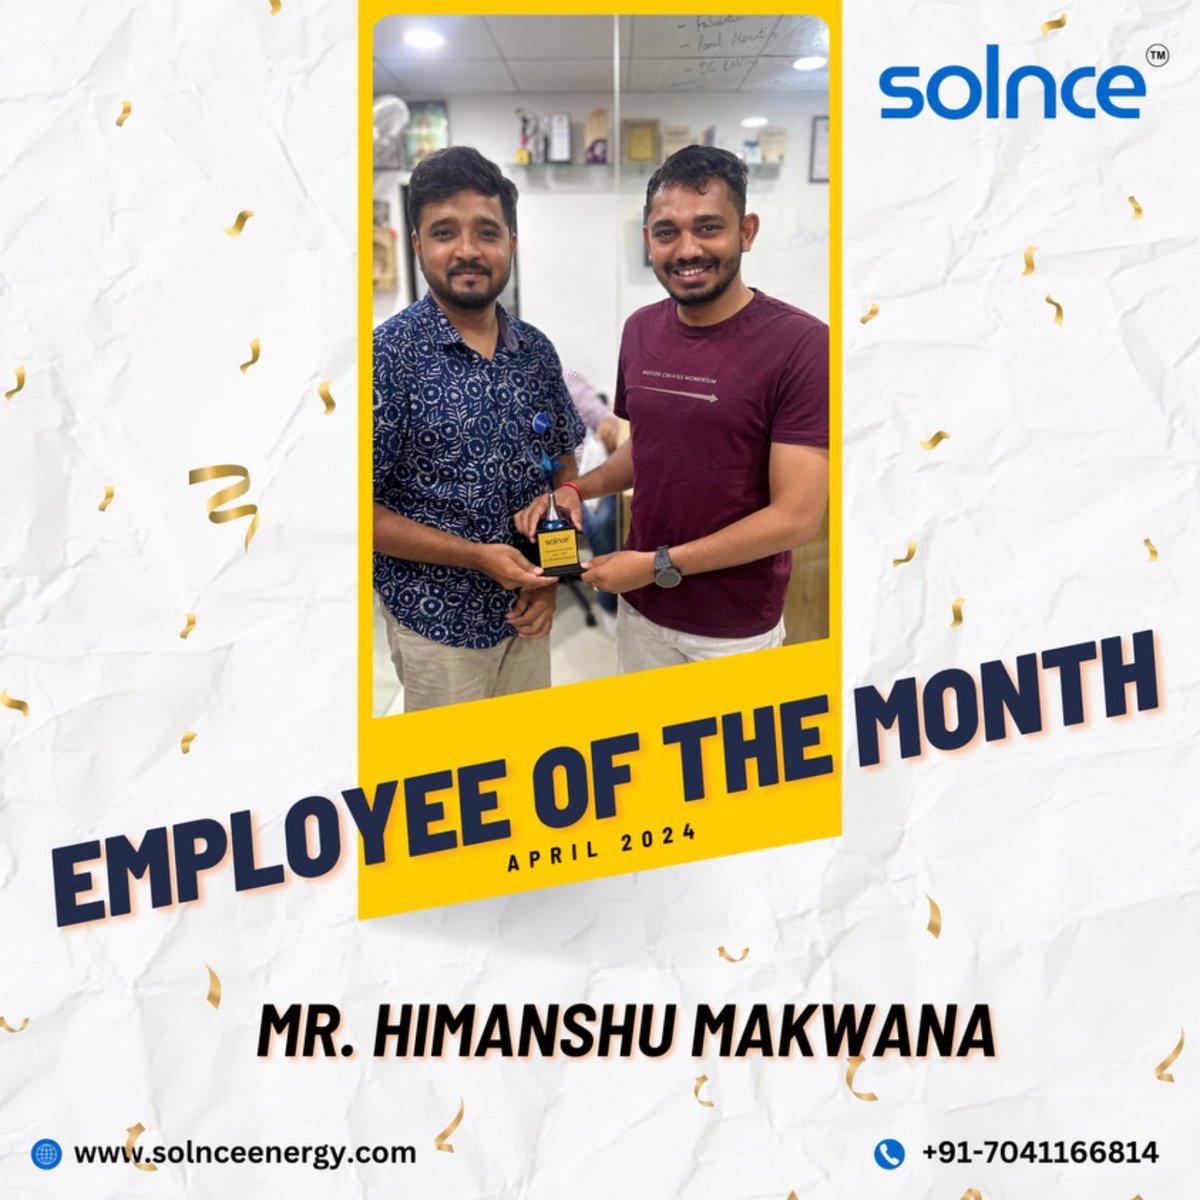 Our team shapes our identity! Congratulations to Himanshu Makwana on winning the #EmployeeOfTheMonth Contest 🎉🥳. Let's strive for even greater heights together! #employee #thursdayvibes #winner #celebration #dedication #passion #goals #solarenergy #sunpowered #achiever #Solnce